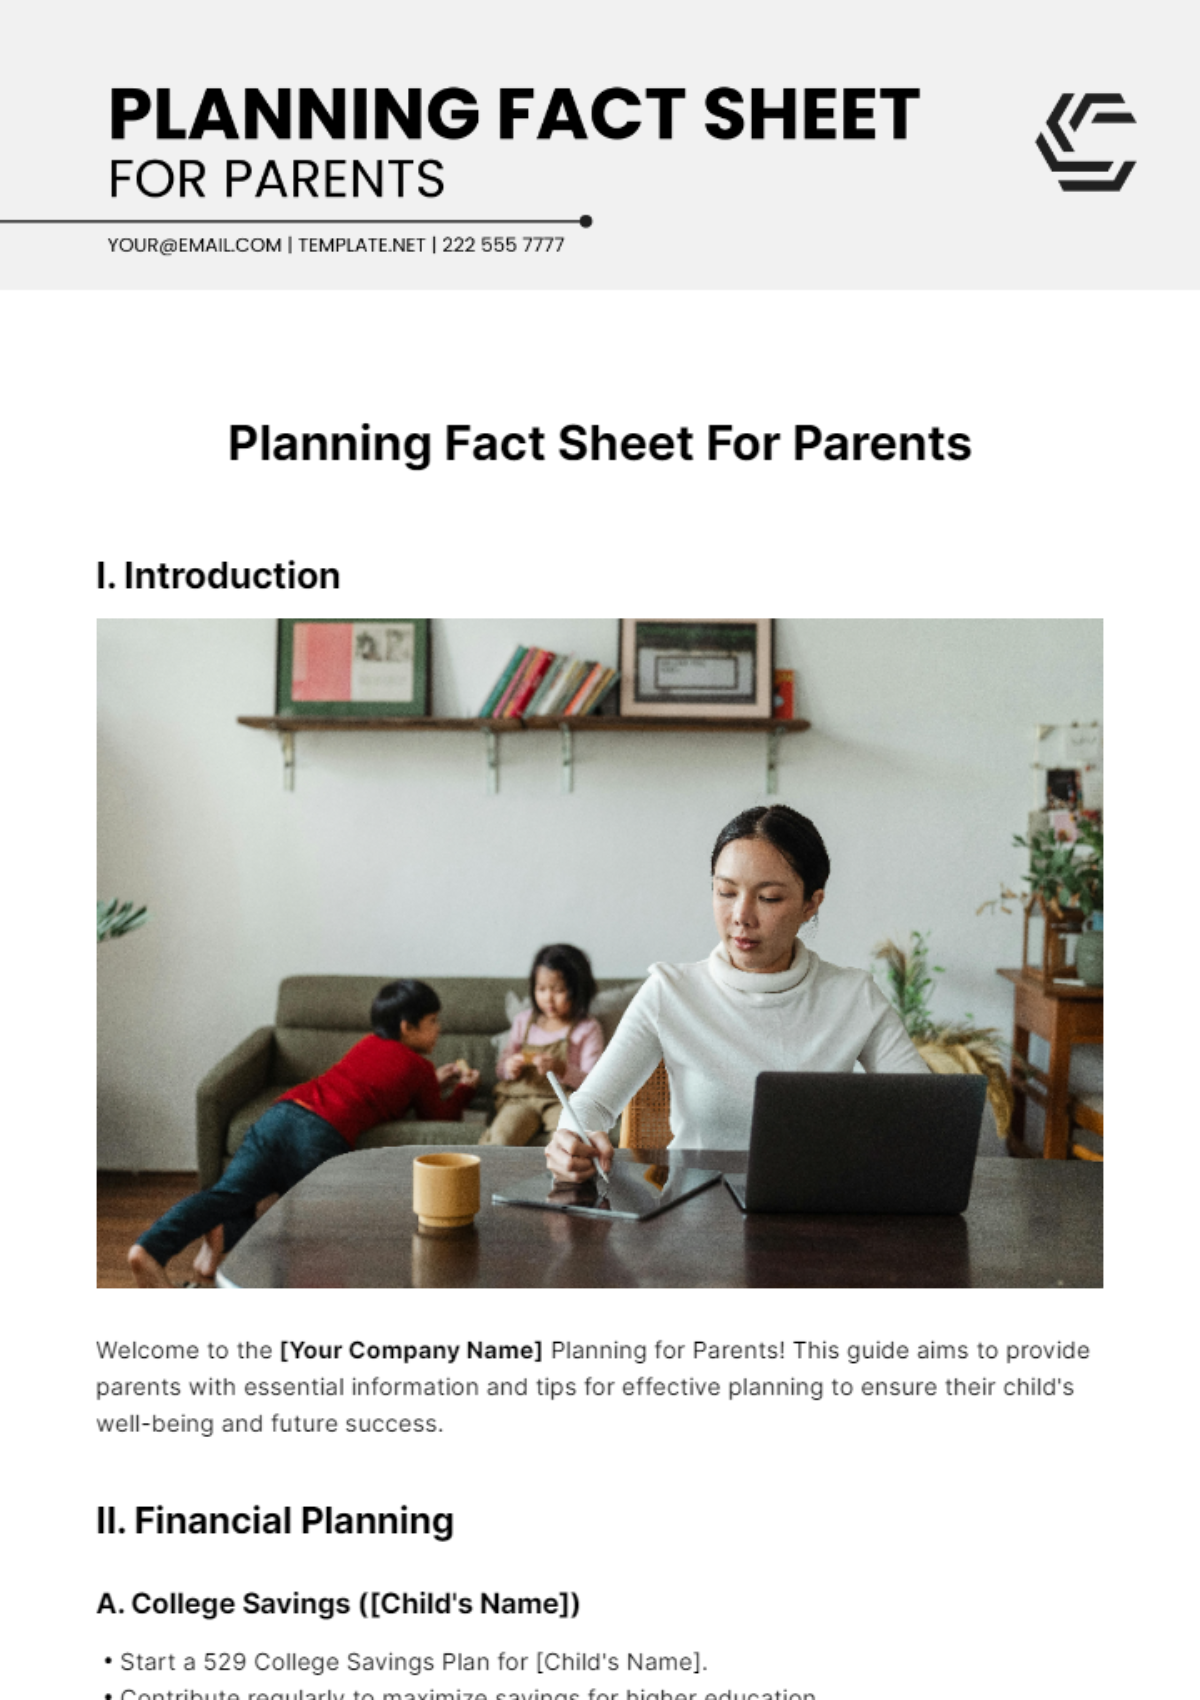 Planning Fact Sheet For Parents Template